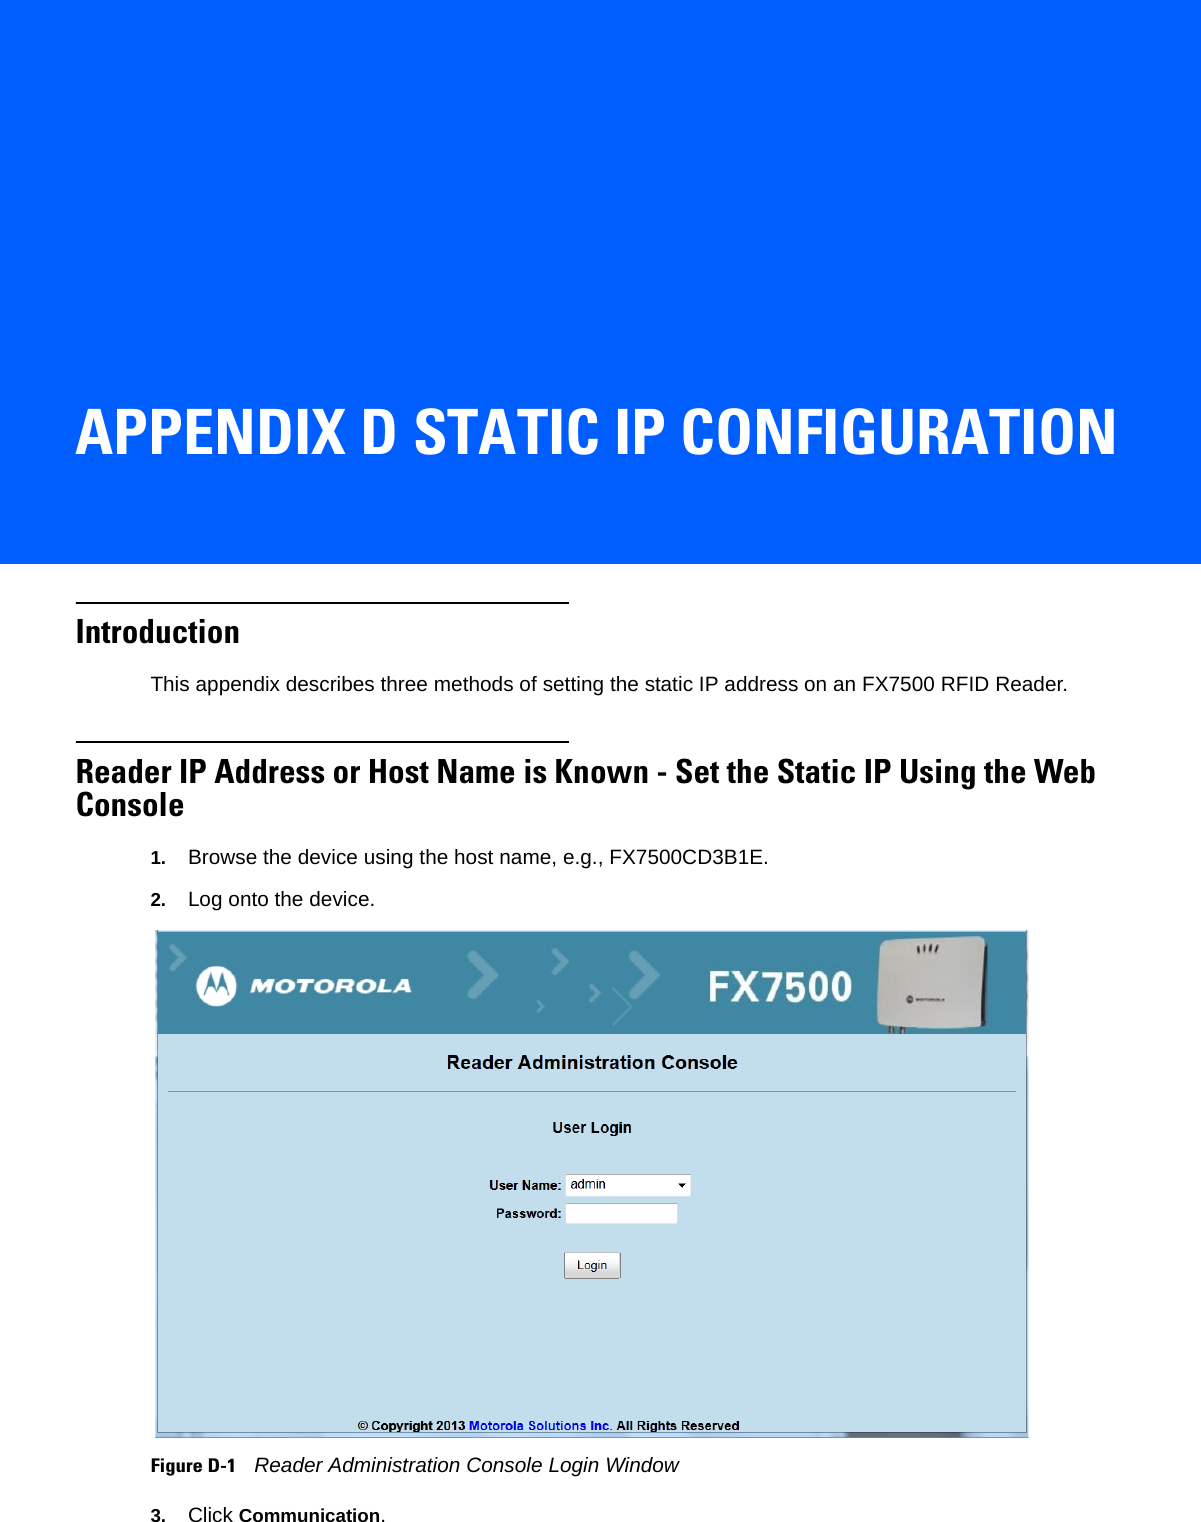 APPENDIX D STATIC IP CONFIGURATIONIntroductionThis appendix describes three methods of setting the static IP address on an FX7500 RFID Reader.Reader IP Address or Host Name is Known - Set the Static IP Using the Web Console1. Browse the device using the host name, e.g., FX7500CD3B1E.2. Log onto the device. Figure D-1    Reader Administration Console Login Window3. Click Communication. 